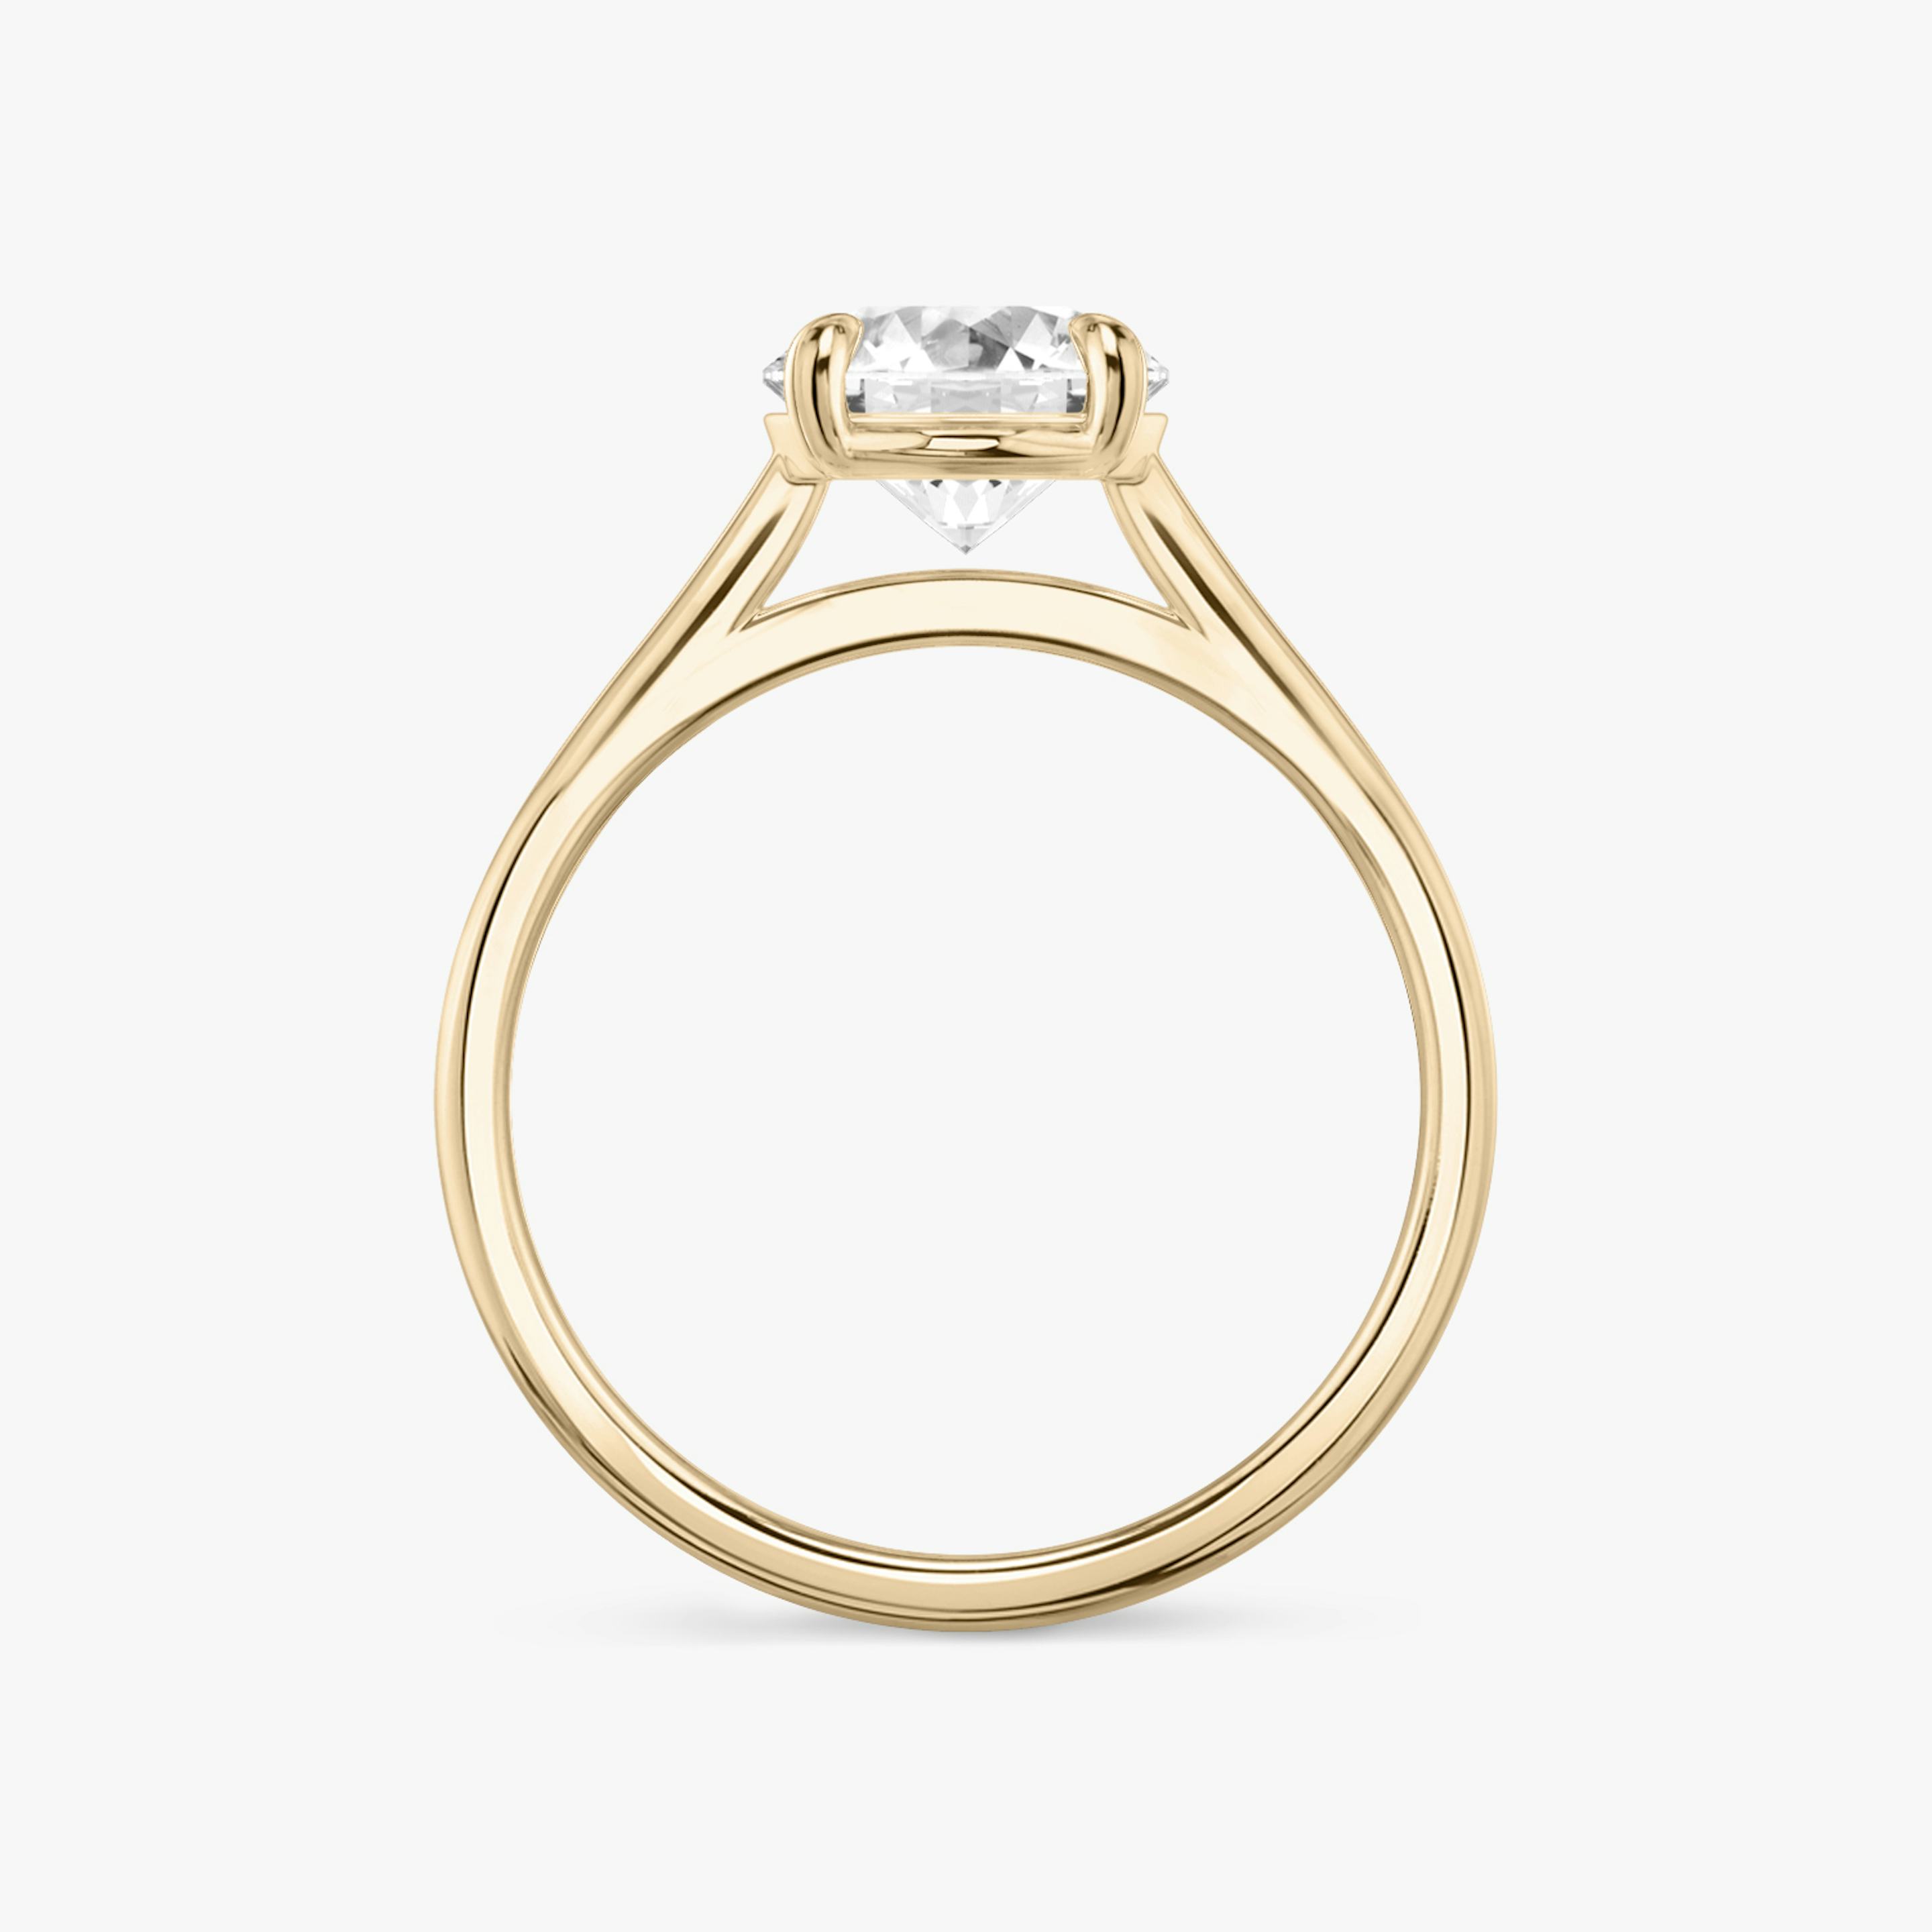 Rose gold Cathedral engagement ring with Round Brilliant cut diamond